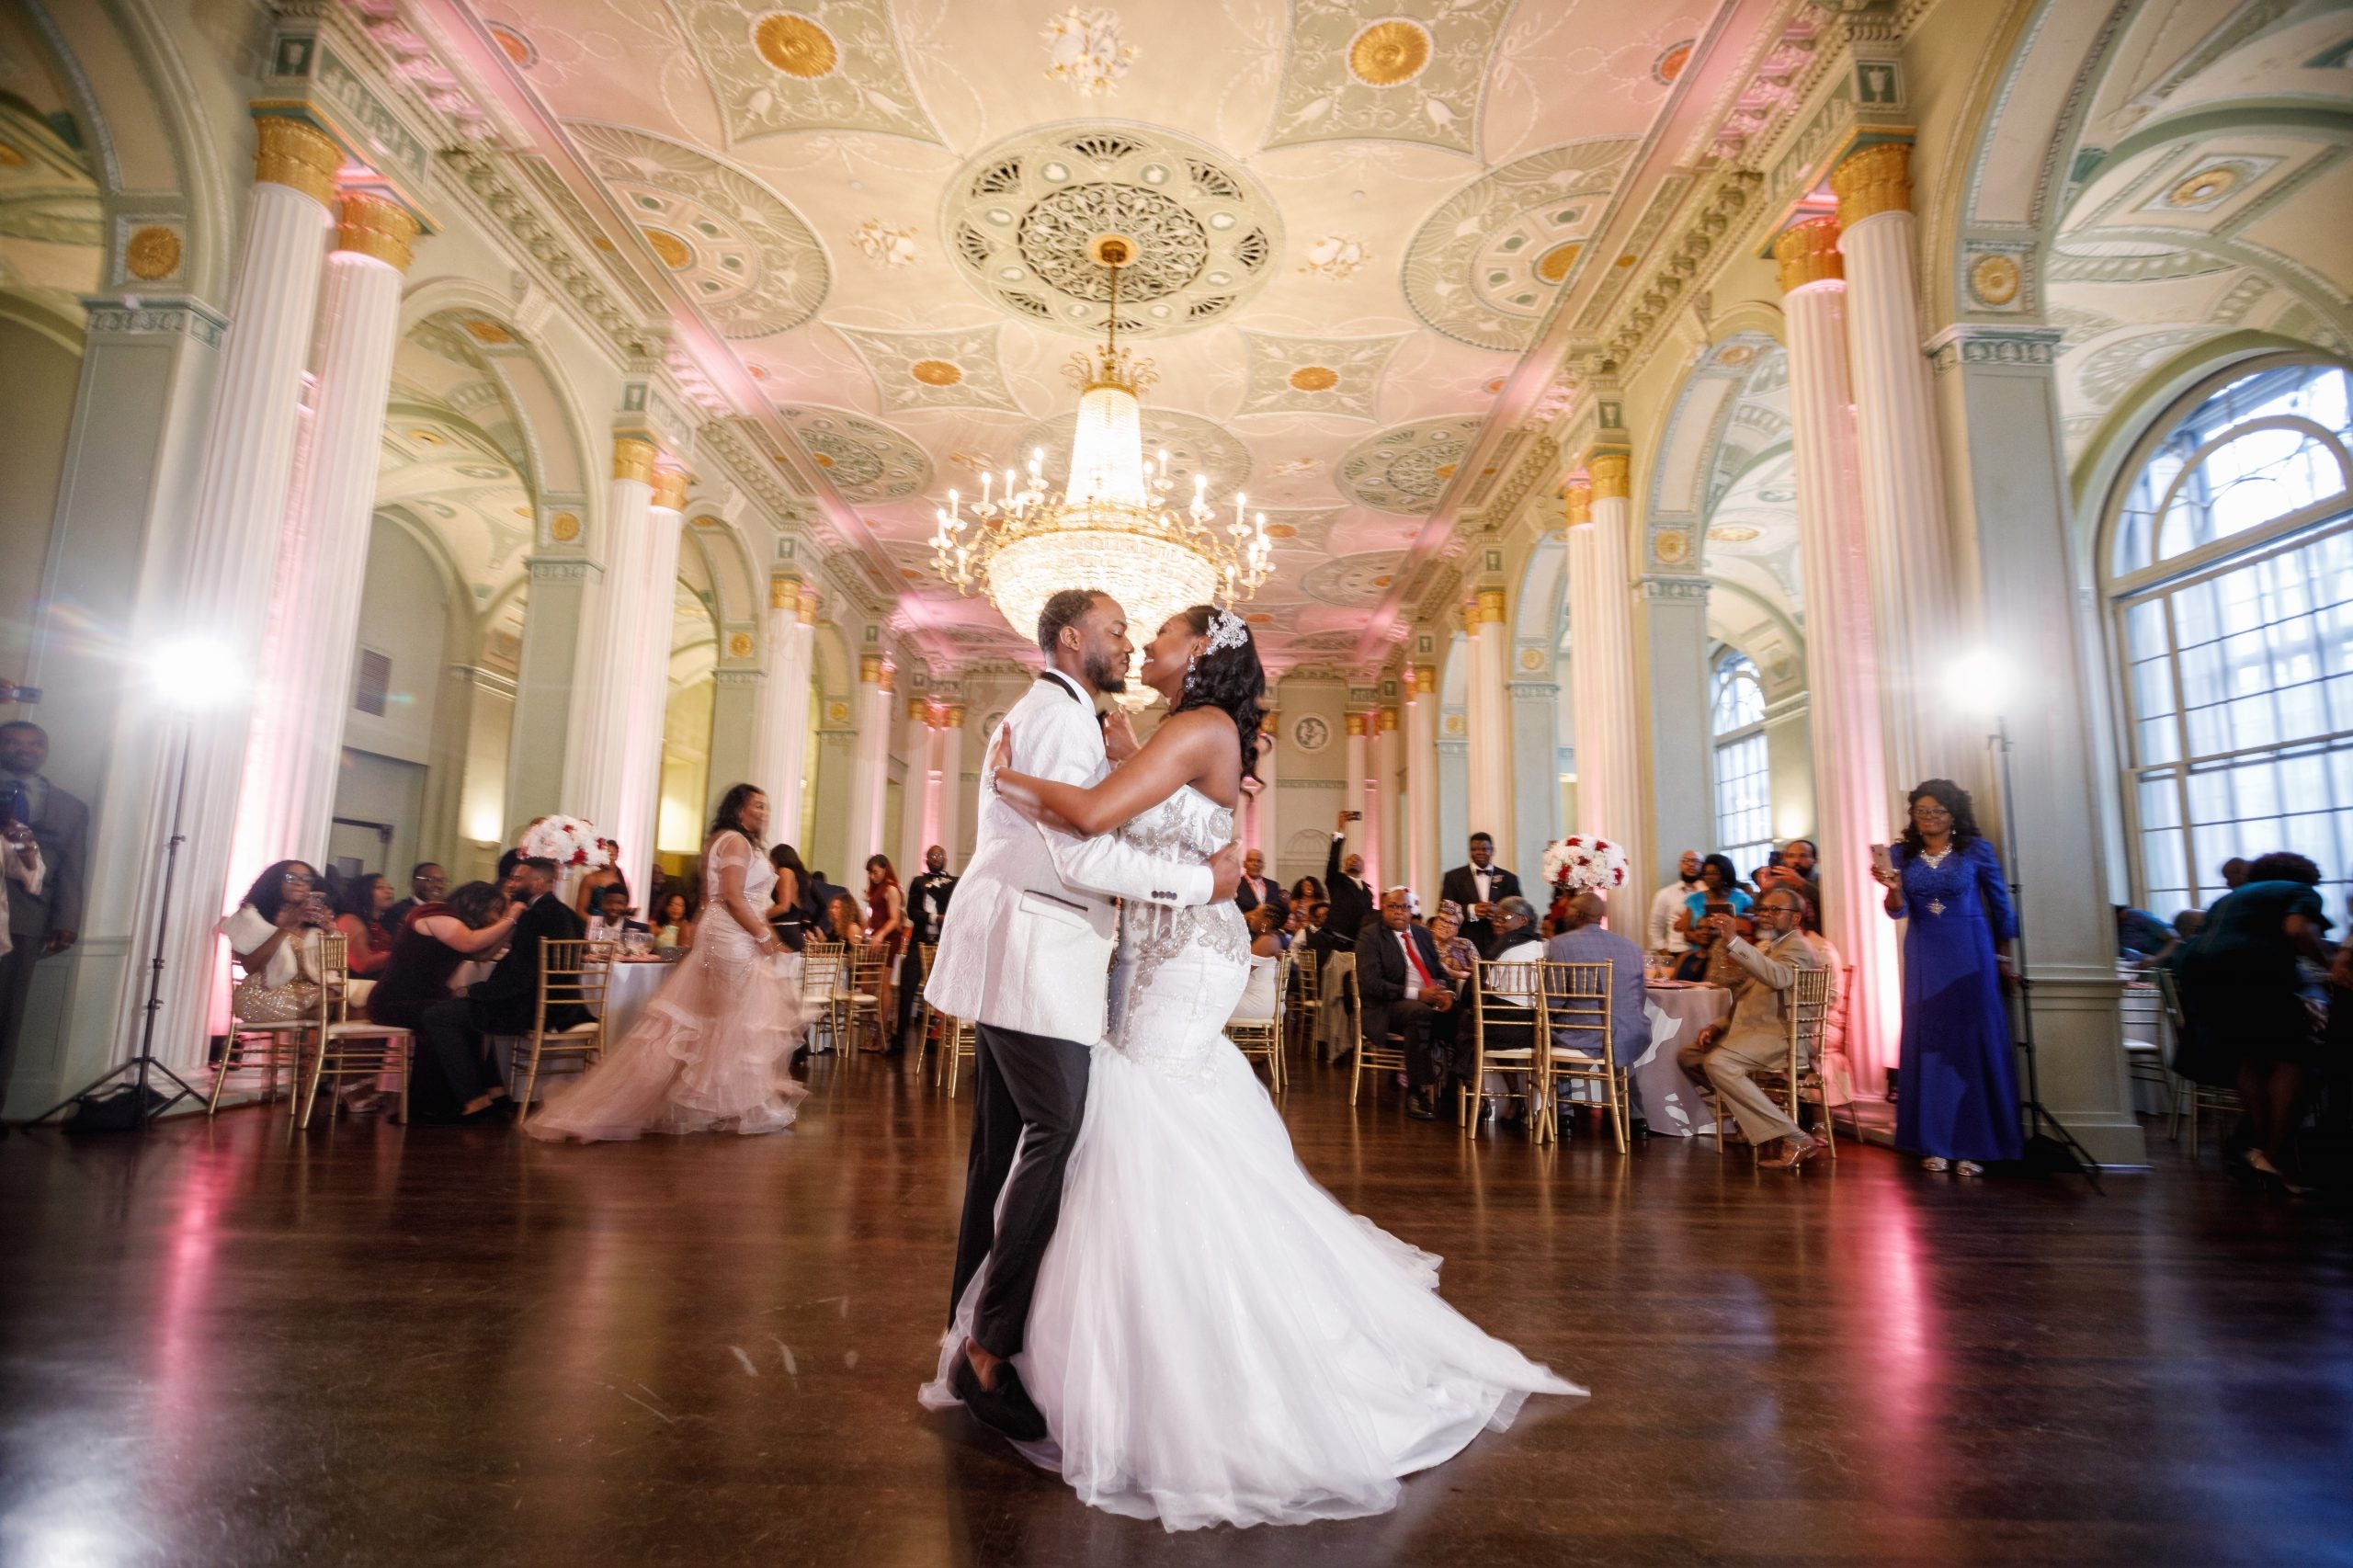 Bridal Bliss: The Bride (And Her Bridesmaids) Wore White At This Ballroom Wedding